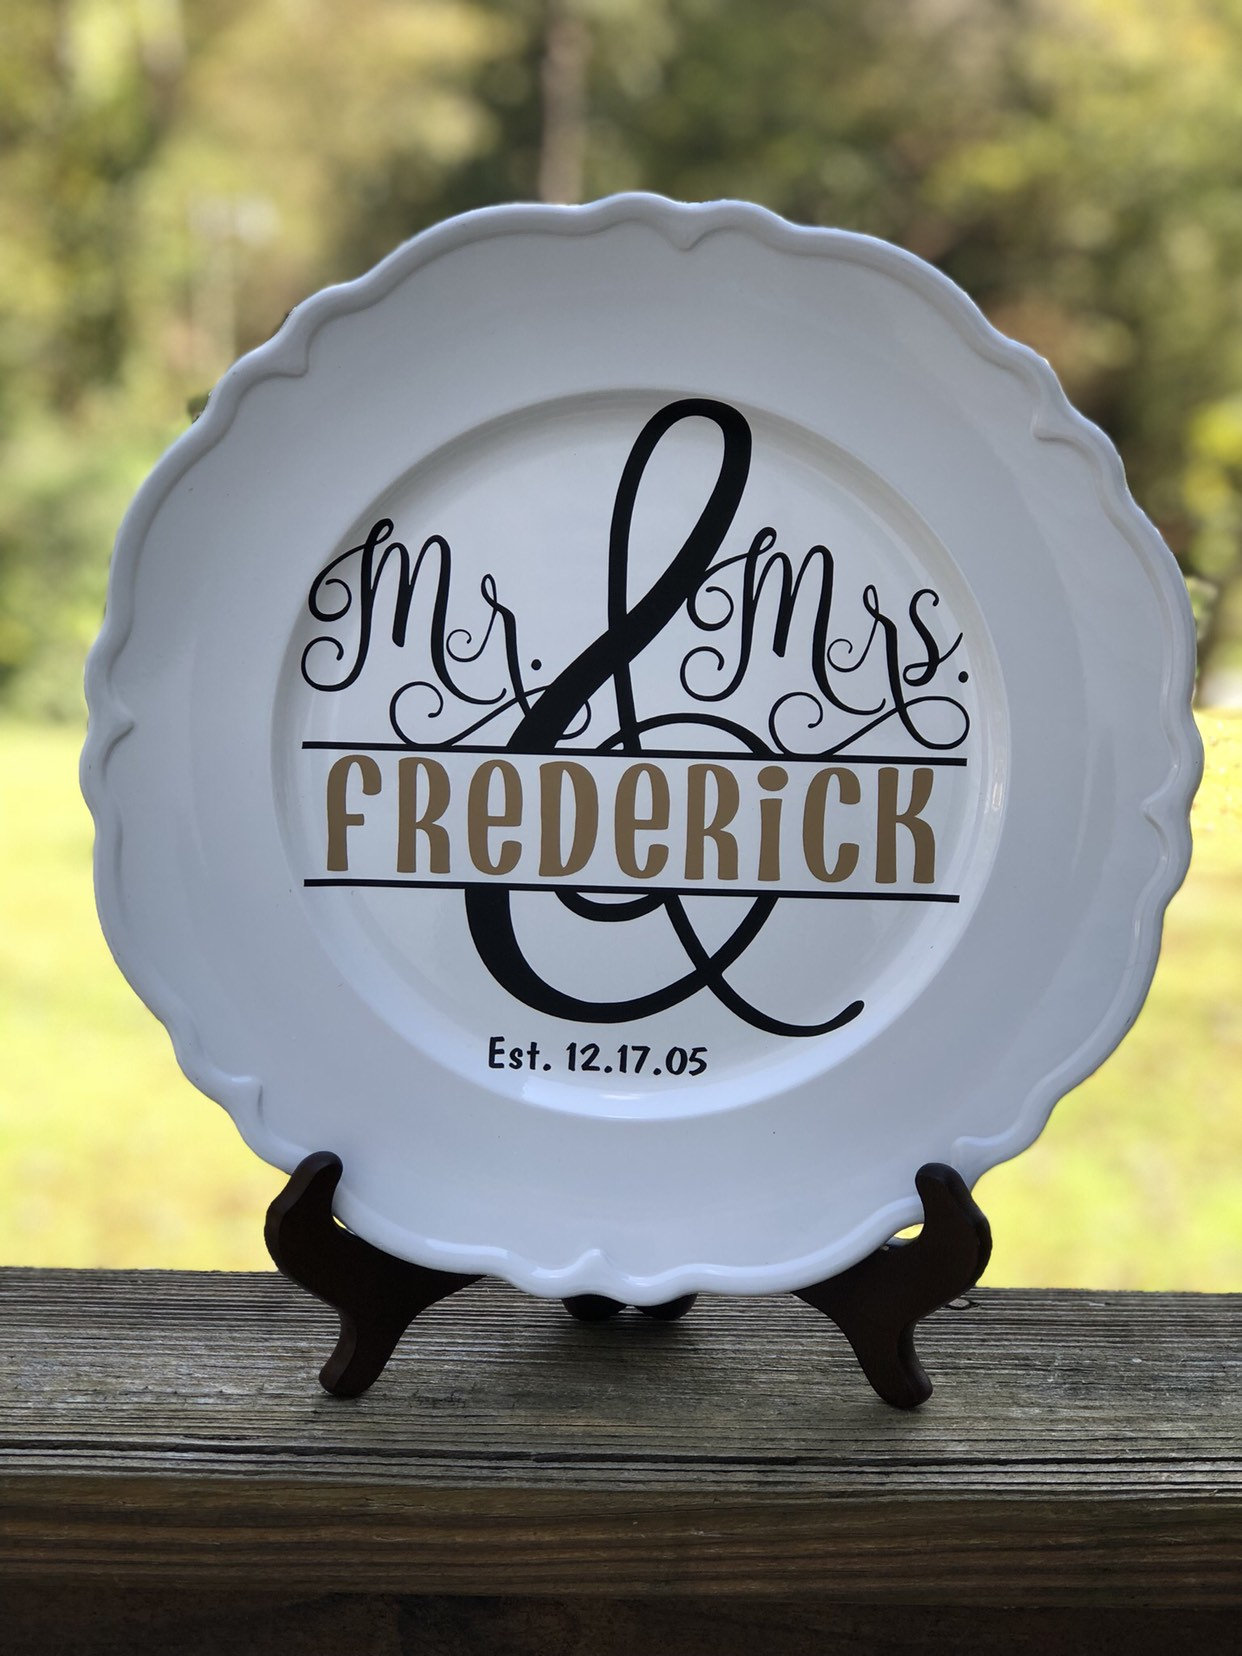 Personalized Wedding Gift Plate Anniversary Gift for Couple 